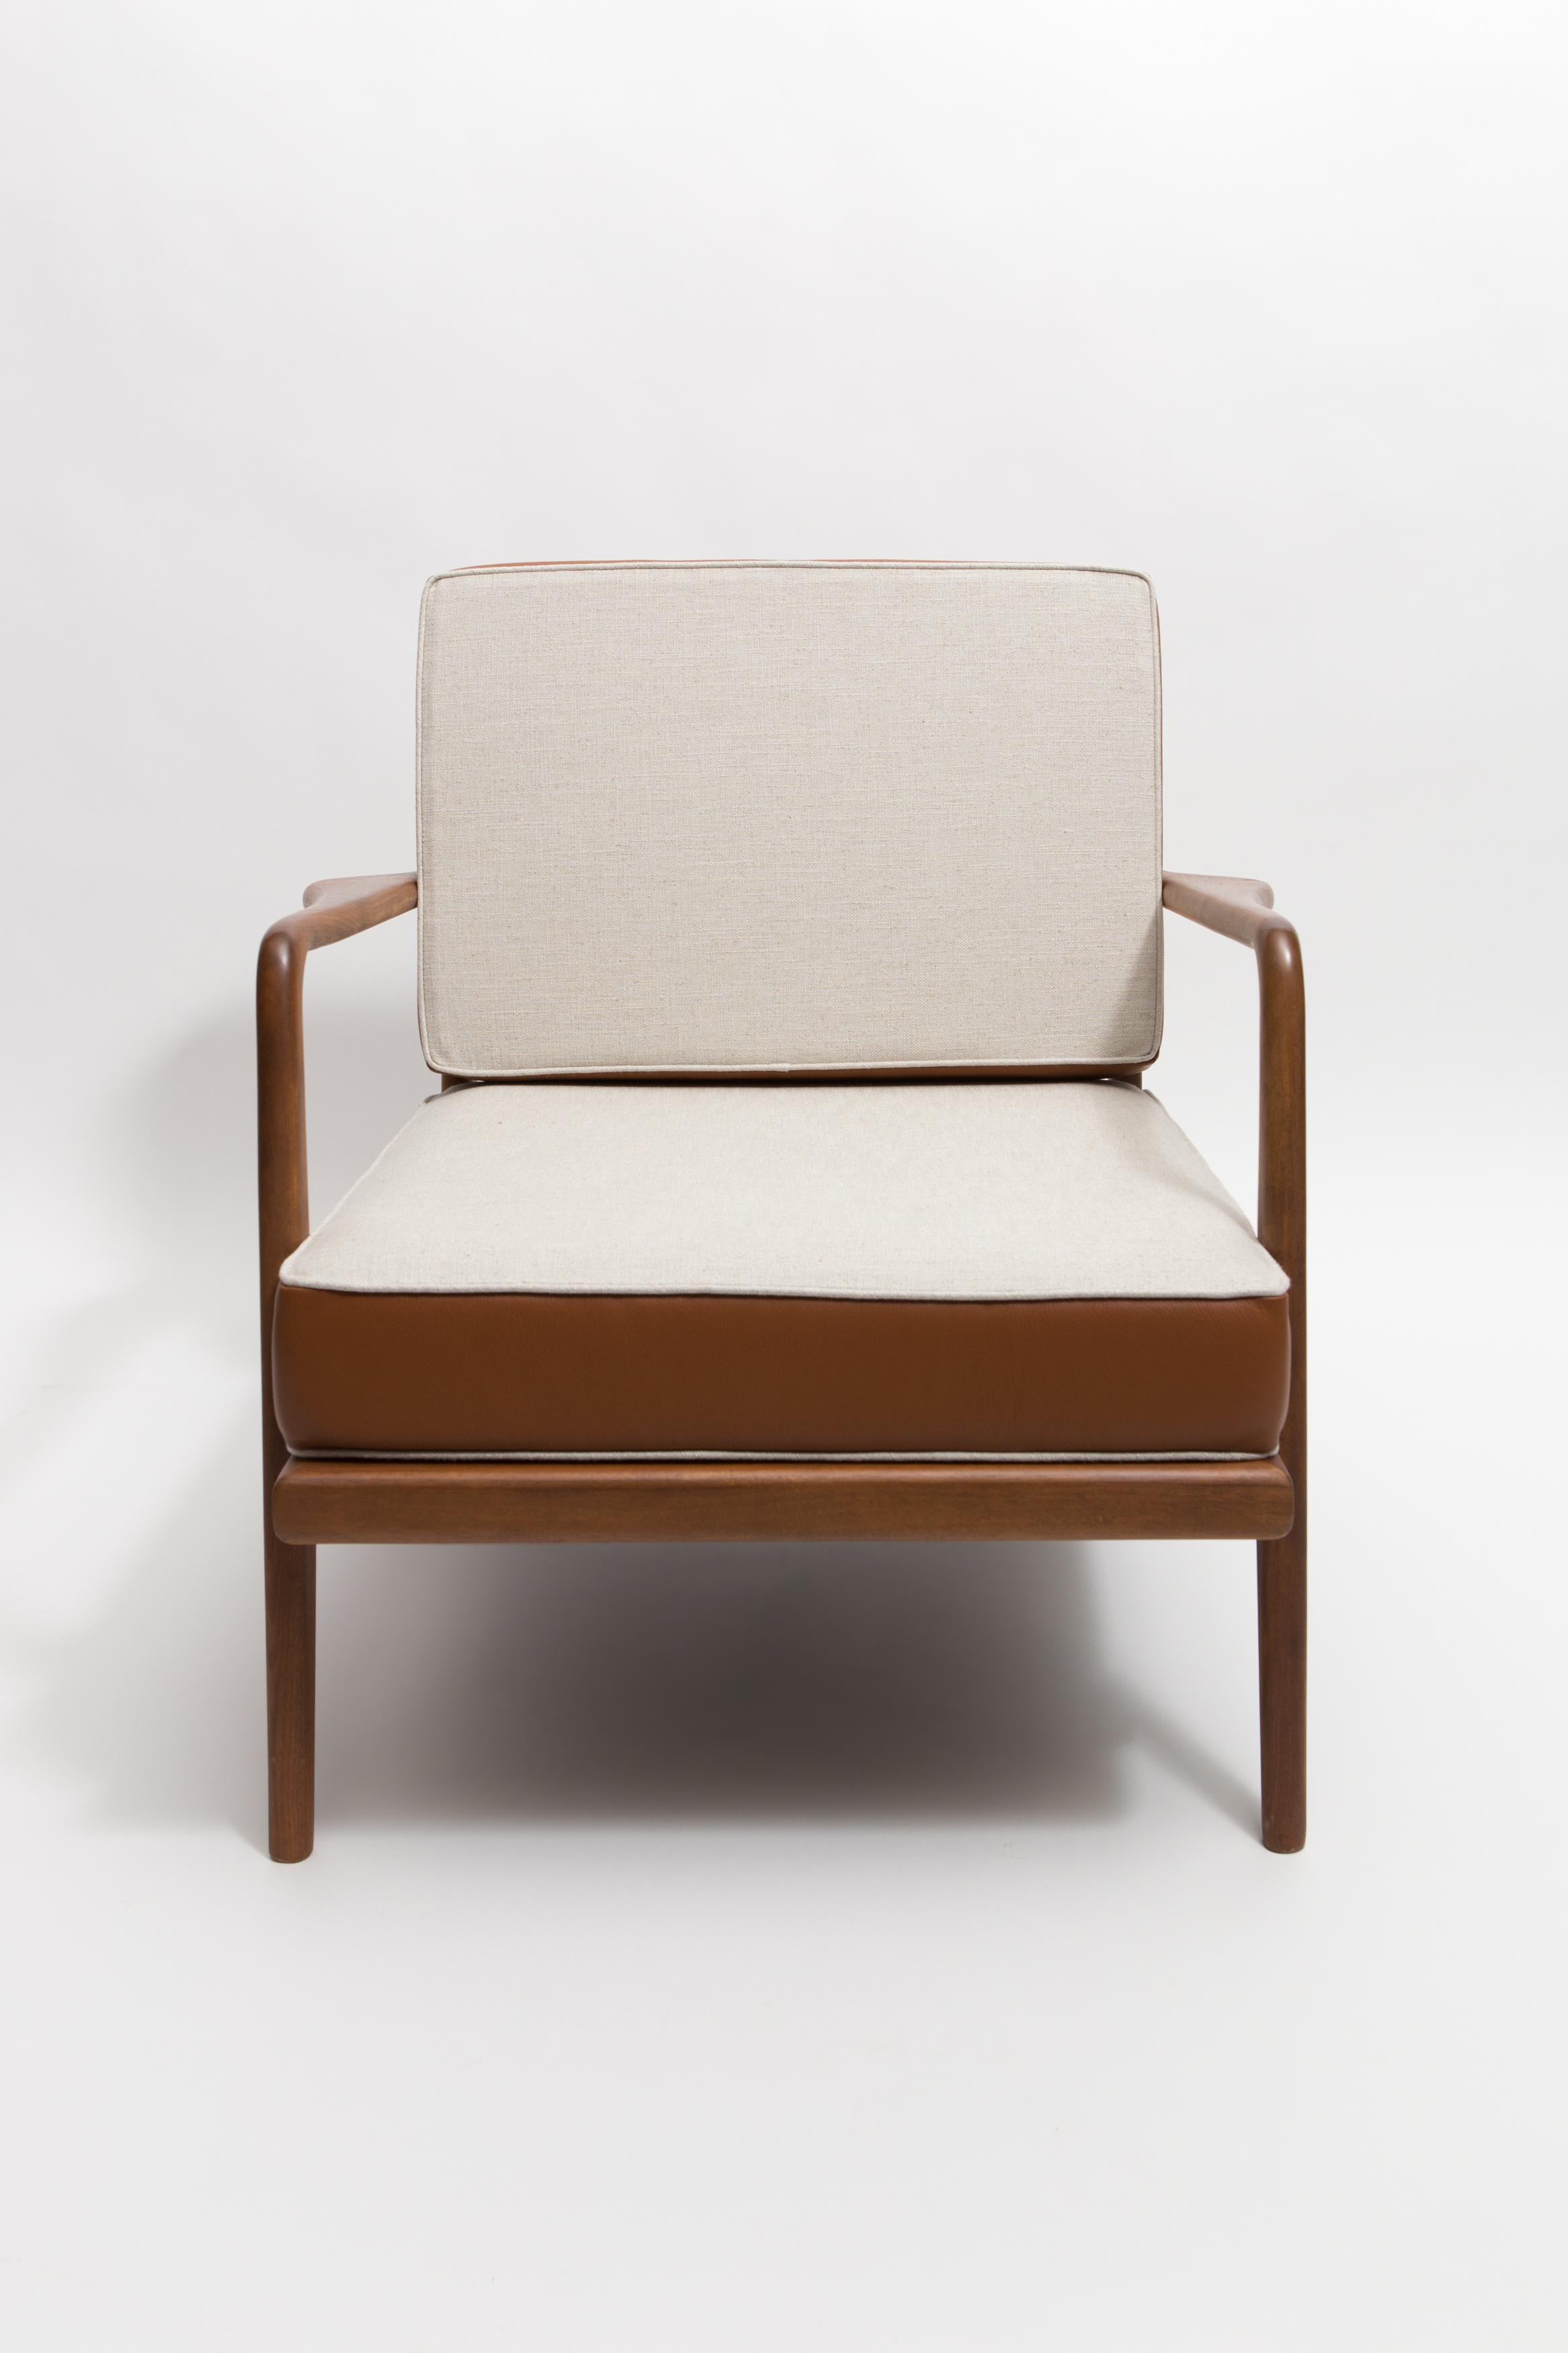 American Walnut Rail Back Armchair with Leather and Linen Cushions by Mel Smilow For Sale